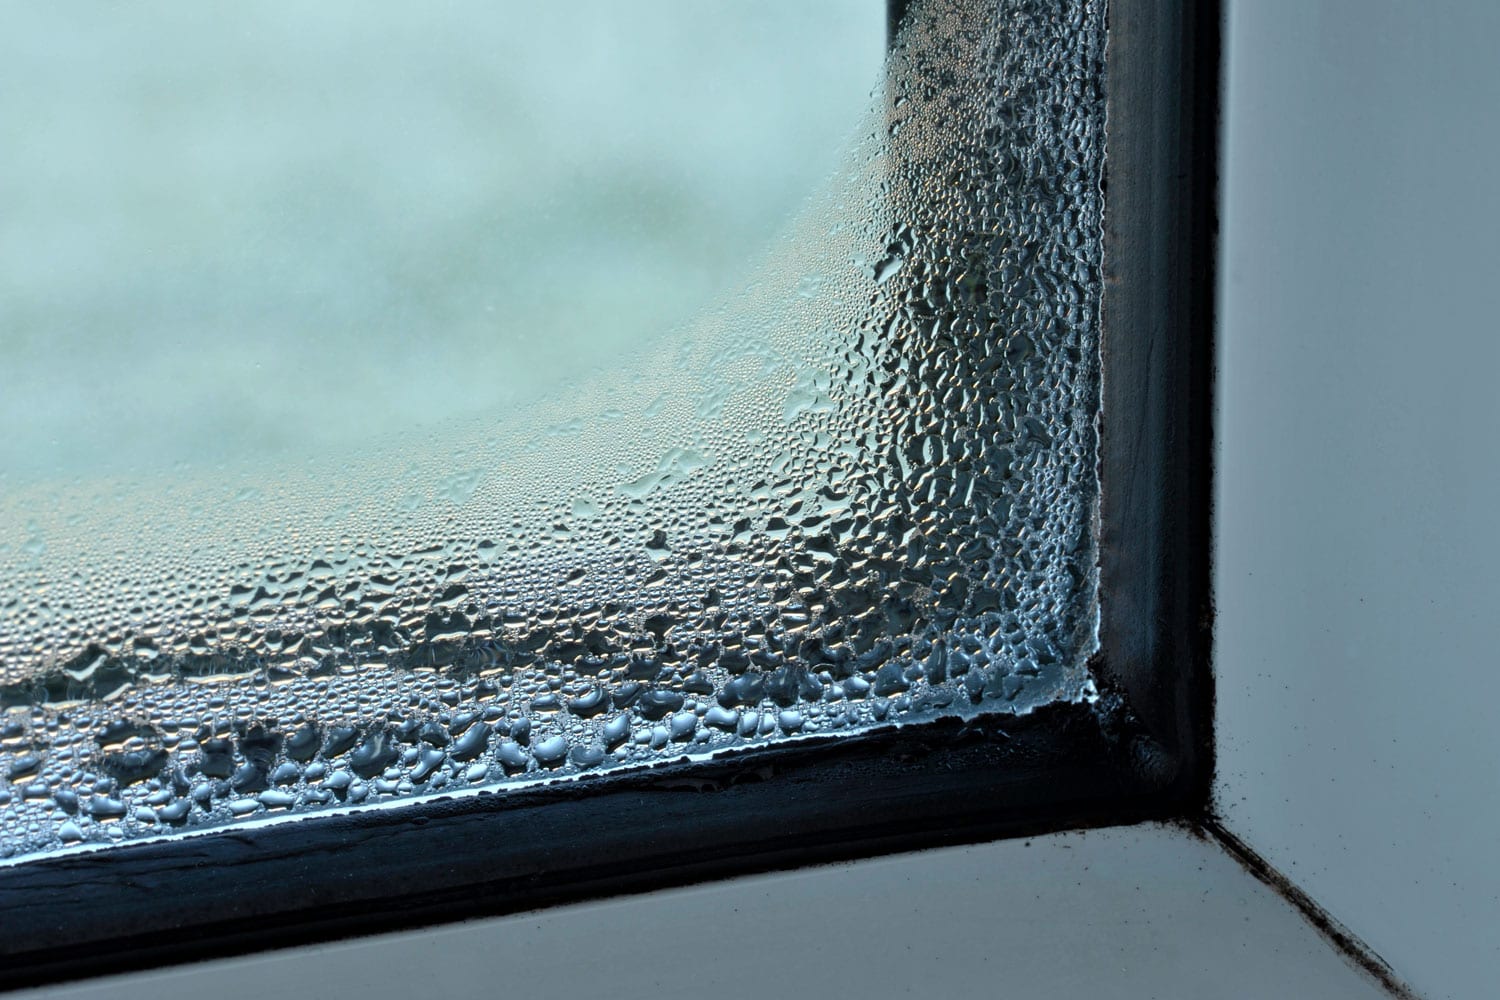 Moisture on the glass due to humid atmosphere in the room